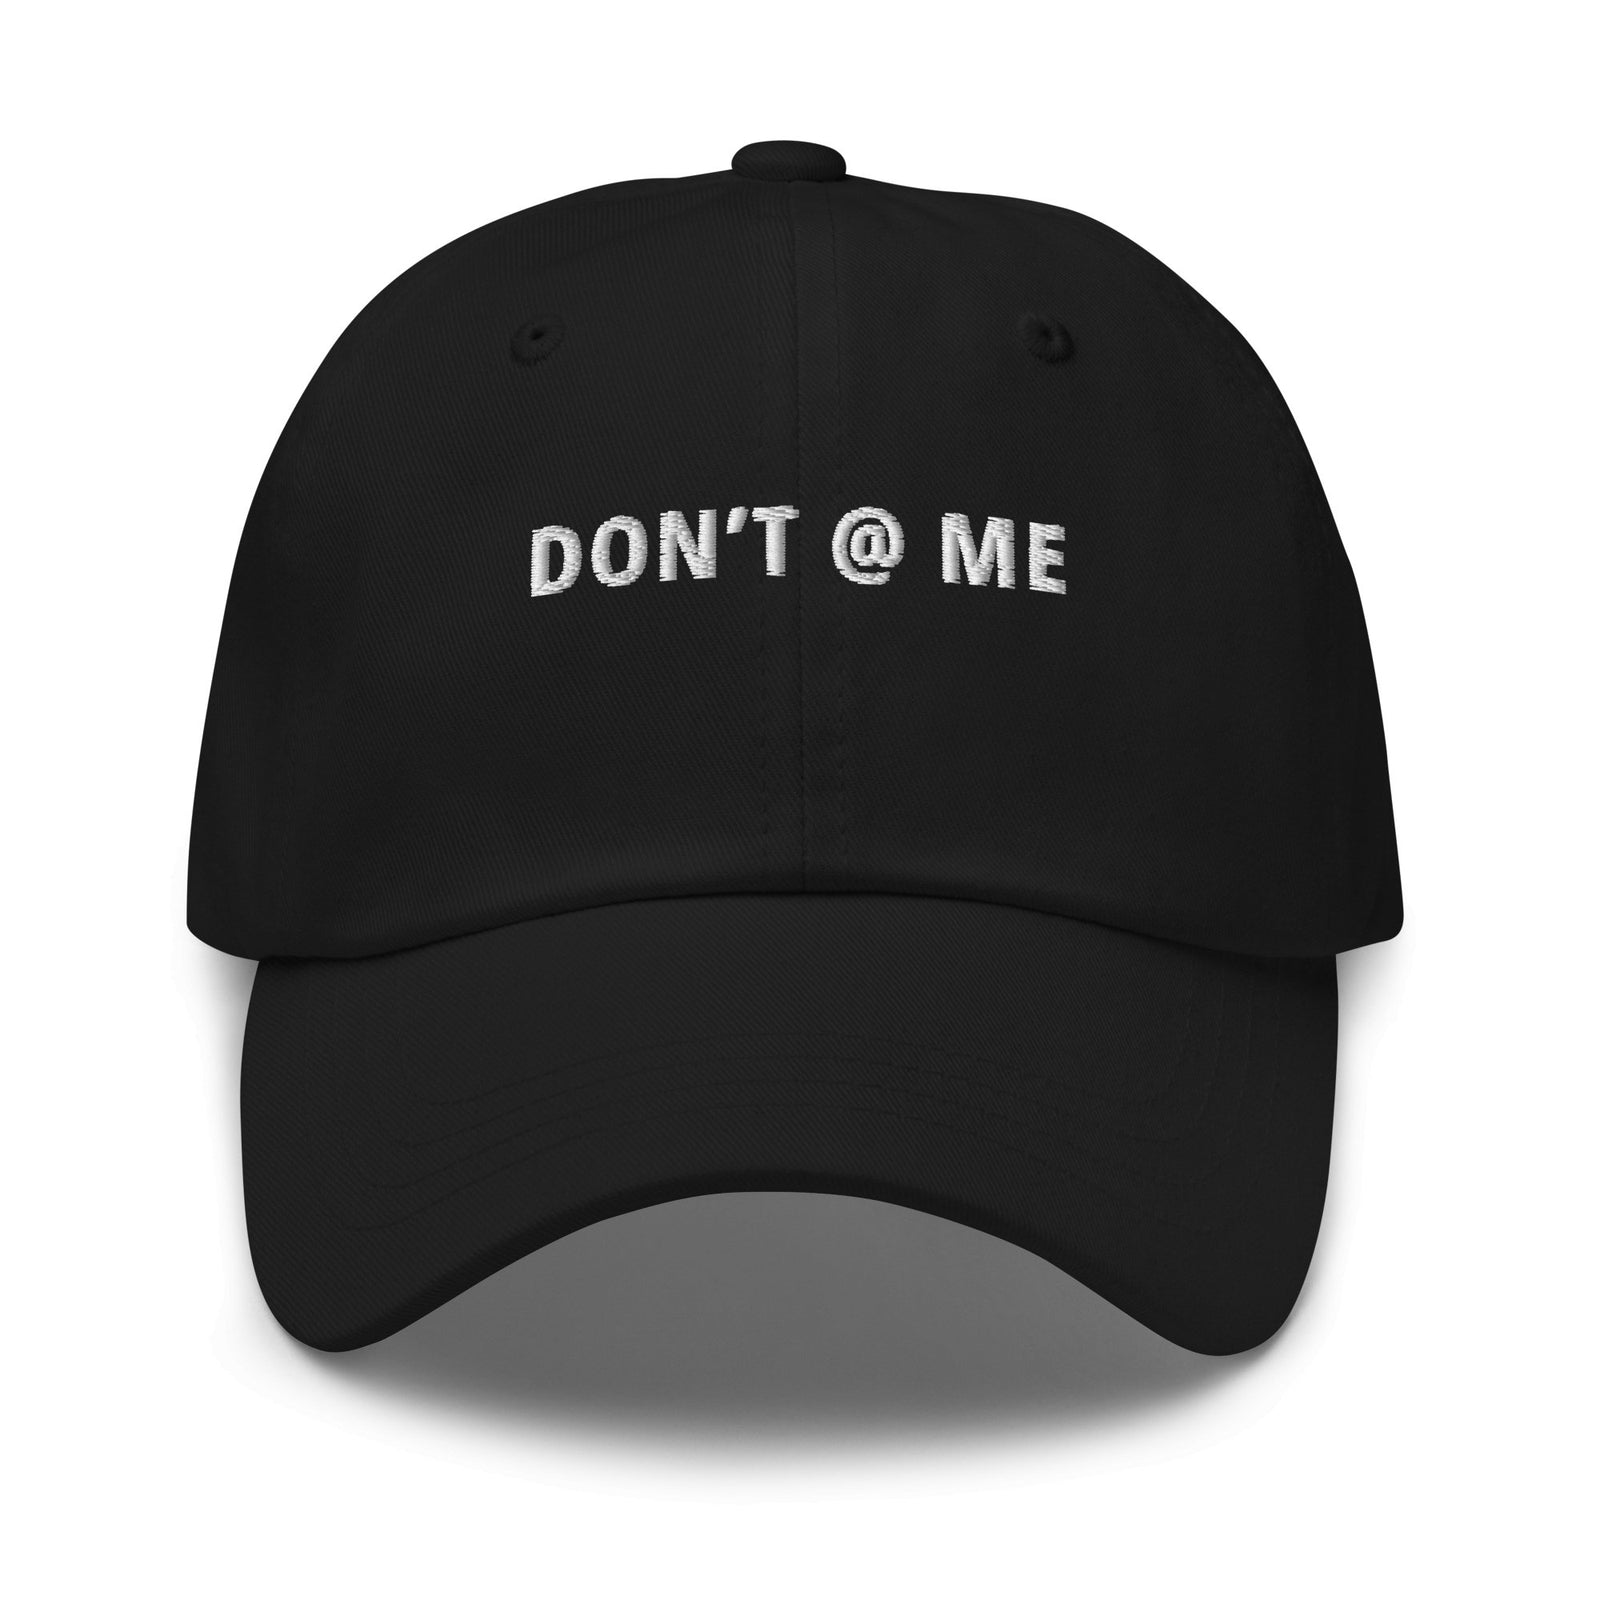 //cdn.shopify.com/s/files/1/0274/2488/2766/products/dont-at-me-dad-hat-523507_5000x.jpg?v=1652422199 5000w,
    //cdn.shopify.com/s/files/1/0274/2488/2766/products/dont-at-me-dad-hat-523507_4500x.jpg?v=1652422199 4500w,
    //cdn.shopify.com/s/files/1/0274/2488/2766/products/dont-at-me-dad-hat-523507_4000x.jpg?v=1652422199 4000w,
    //cdn.shopify.com/s/files/1/0274/2488/2766/products/dont-at-me-dad-hat-523507_3500x.jpg?v=1652422199 3500w,
    //cdn.shopify.com/s/files/1/0274/2488/2766/products/dont-at-me-dad-hat-523507_3000x.jpg?v=1652422199 3000w,
    //cdn.shopify.com/s/files/1/0274/2488/2766/products/dont-at-me-dad-hat-523507_2500x.jpg?v=1652422199 2500w,
    //cdn.shopify.com/s/files/1/0274/2488/2766/products/dont-at-me-dad-hat-523507_2000x.jpg?v=1652422199 2000w,
    //cdn.shopify.com/s/files/1/0274/2488/2766/products/dont-at-me-dad-hat-523507_1800x.jpg?v=1652422199 1800w,
    //cdn.shopify.com/s/files/1/0274/2488/2766/products/dont-at-me-dad-hat-523507_1600x.jpg?v=1652422199 1600w,
    //cdn.shopify.com/s/files/1/0274/2488/2766/products/dont-at-me-dad-hat-523507_1400x.jpg?v=1652422199 1400w,
    //cdn.shopify.com/s/files/1/0274/2488/2766/products/dont-at-me-dad-hat-523507_1200x.jpg?v=1652422199 1200w,
    //cdn.shopify.com/s/files/1/0274/2488/2766/products/dont-at-me-dad-hat-523507_1000x.jpg?v=1652422199 1000w,
    //cdn.shopify.com/s/files/1/0274/2488/2766/products/dont-at-me-dad-hat-523507_800x.jpg?v=1652422199 800w,
    //cdn.shopify.com/s/files/1/0274/2488/2766/products/dont-at-me-dad-hat-523507_600x.jpg?v=1652422199 600w,
    //cdn.shopify.com/s/files/1/0274/2488/2766/products/dont-at-me-dad-hat-523507_400x.jpg?v=1652422199 400w,
    //cdn.shopify.com/s/files/1/0274/2488/2766/products/dont-at-me-dad-hat-523507_200x.jpg?v=1652422199 200w